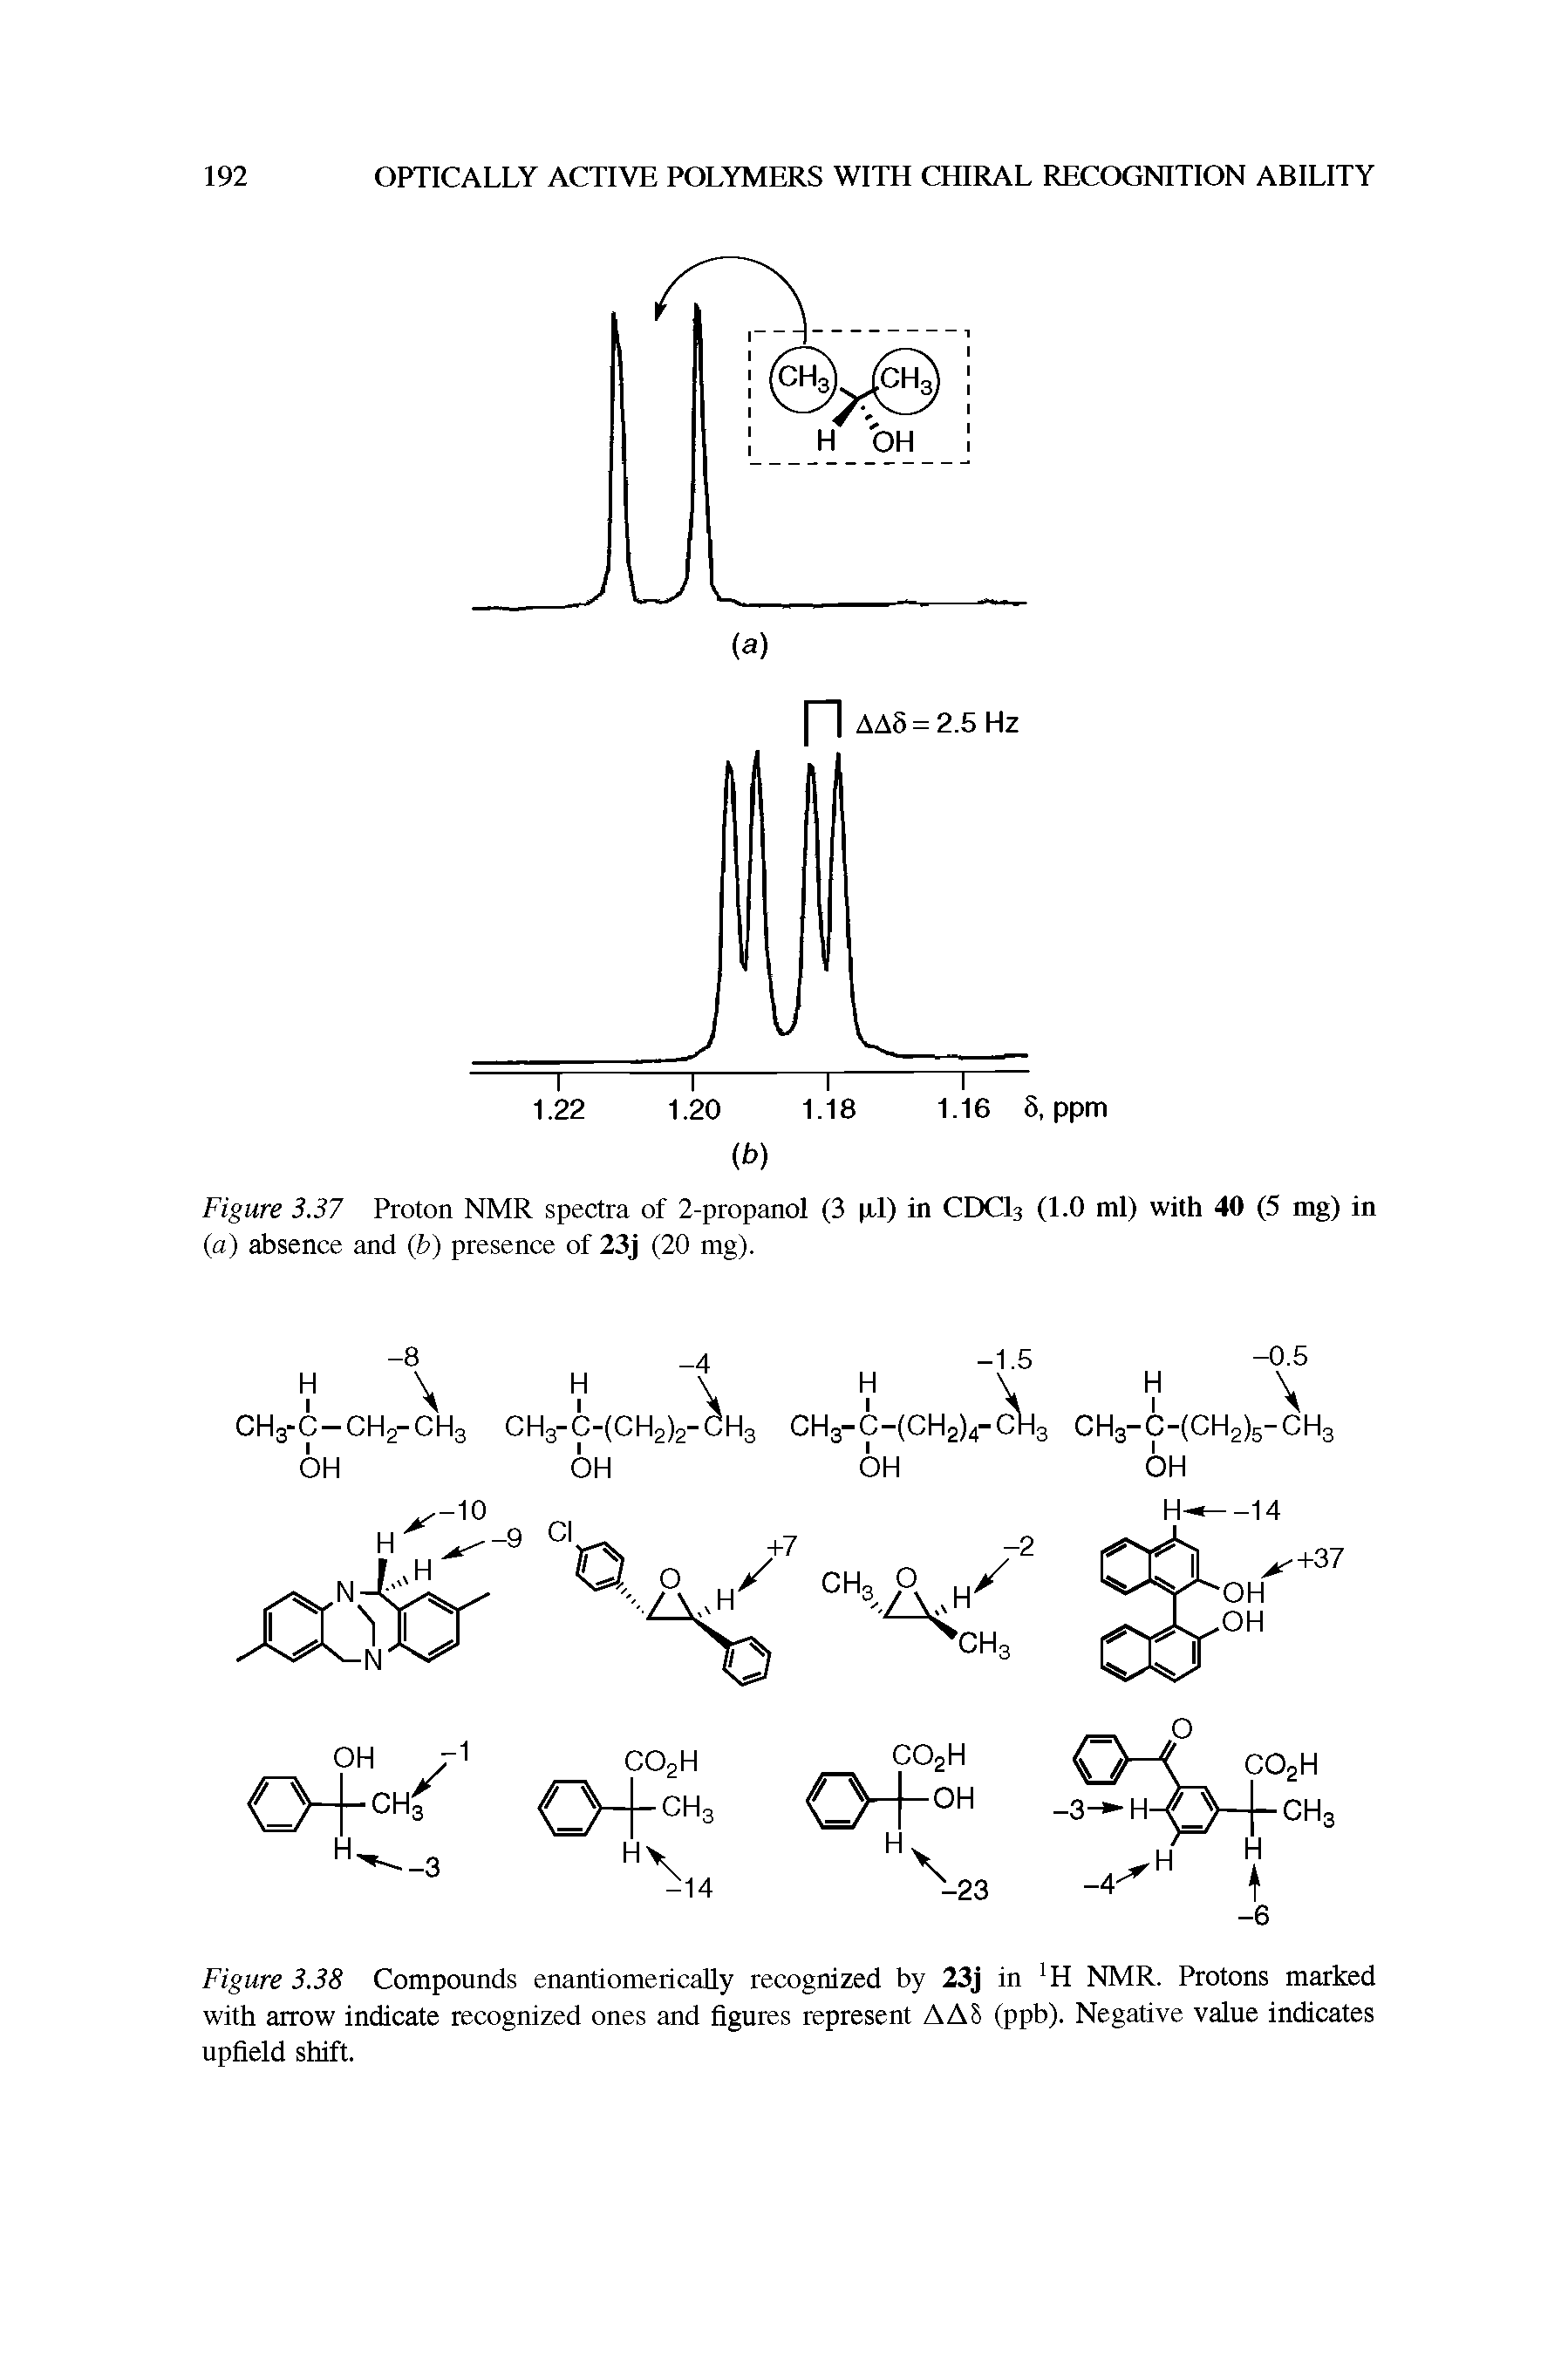 Figure 3.38 Compounds enantiomerically recognized by 23j in H NMR. Protons marked with arrow indicate recognized ones and figures represent AA8 (ppb). Negative value indicates upfield shift.